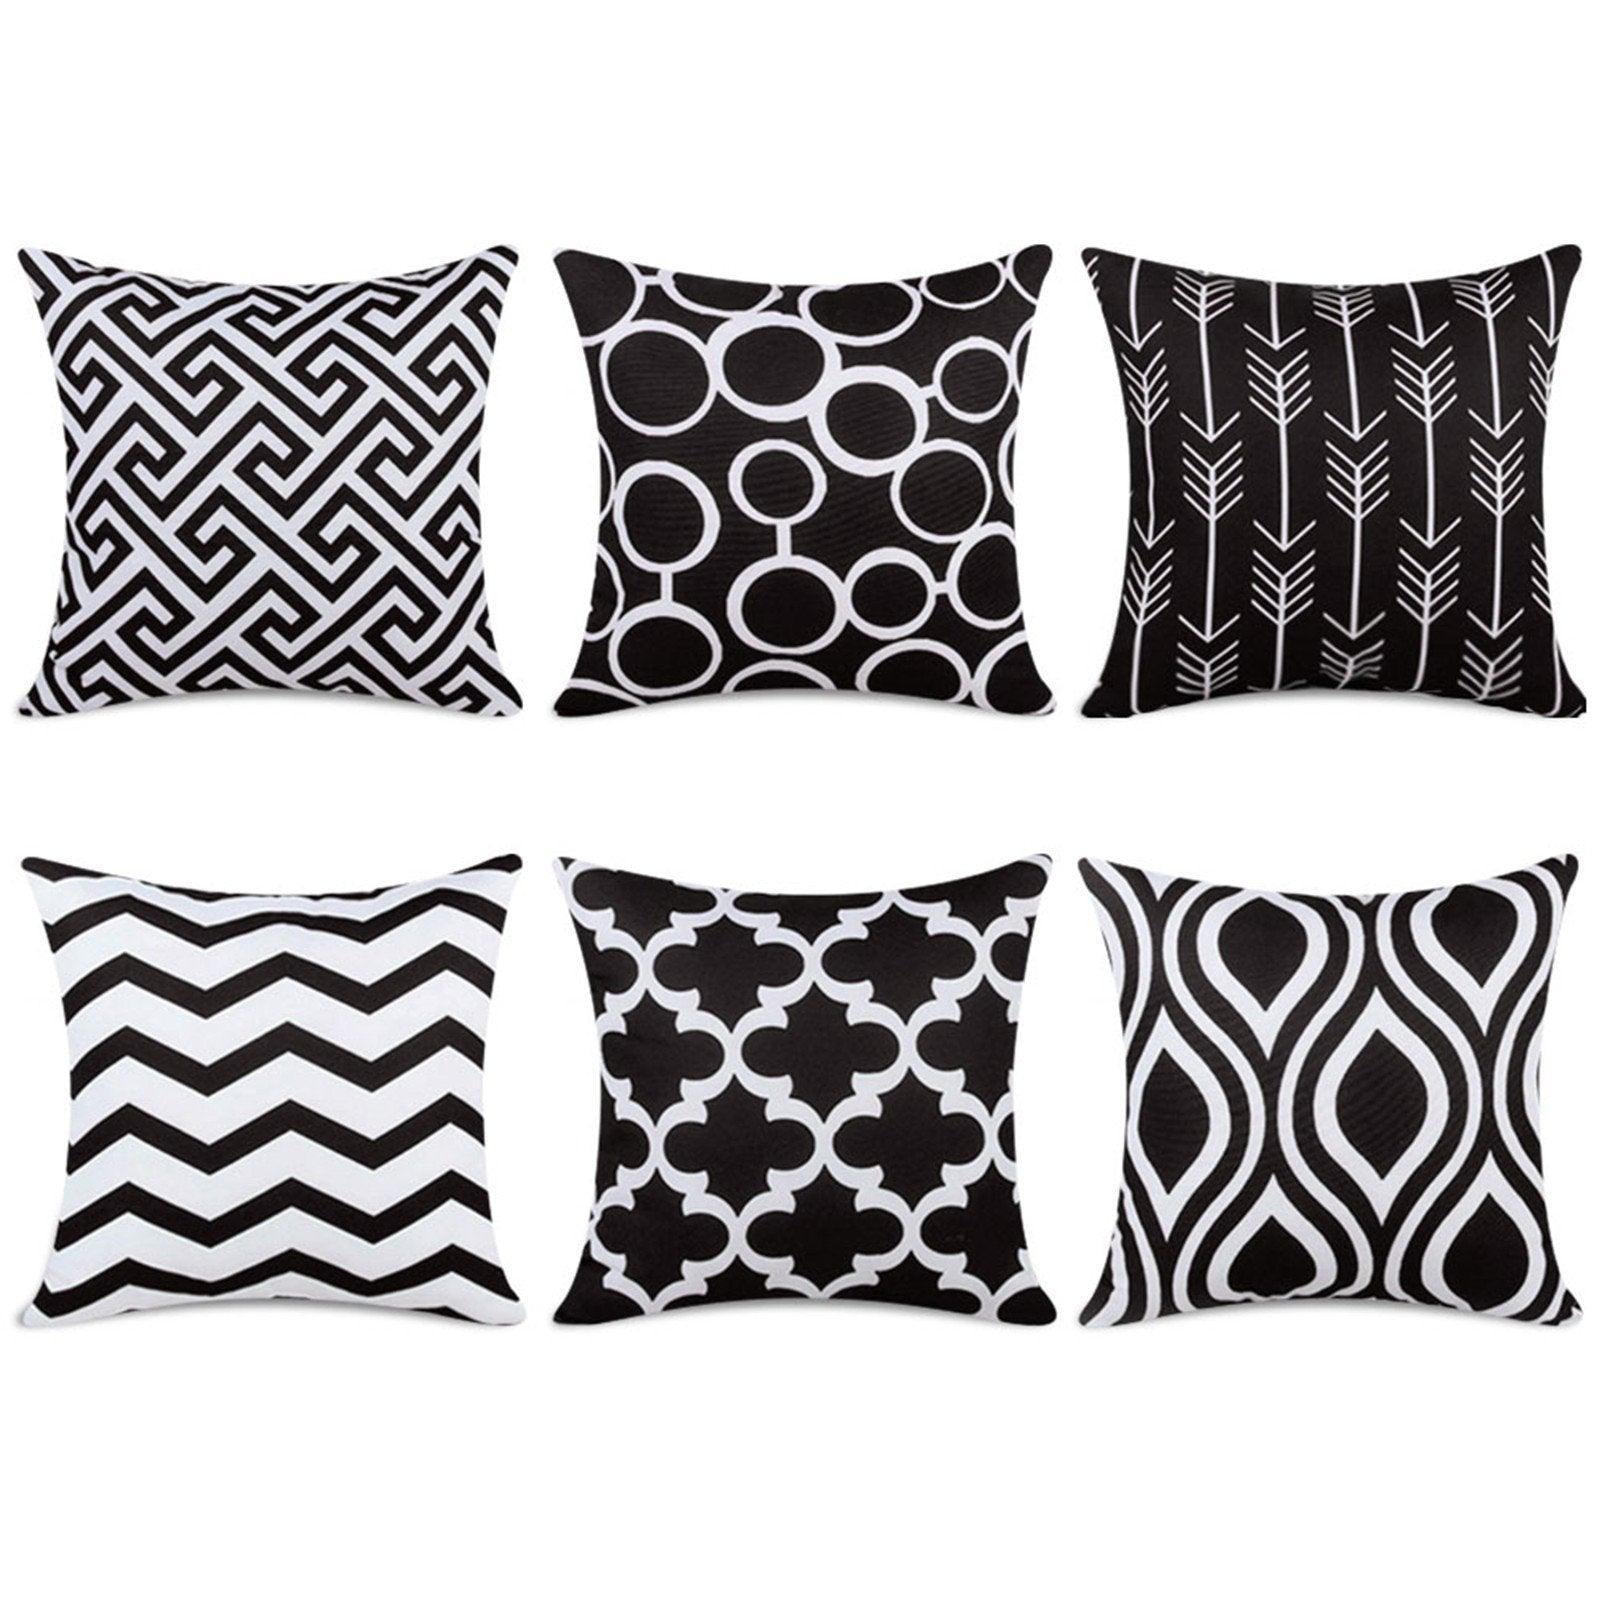 100% Durable Canvas Square Decorative 18×18 inch Throw Pillows Cushion Covers Pillowcases for Sofa,Set of 6 - Topfinel